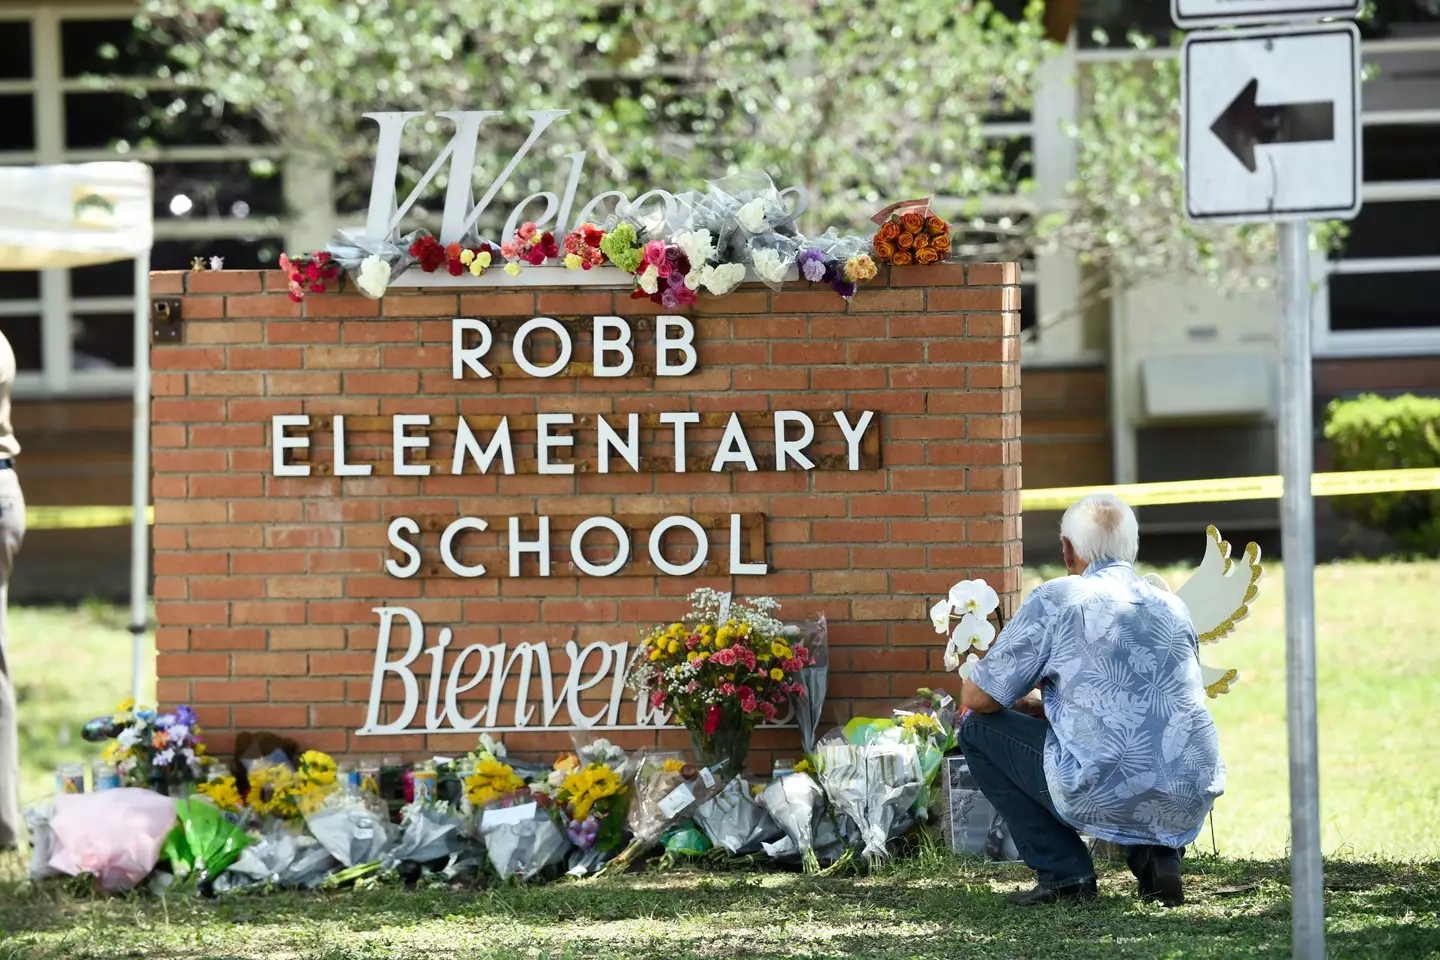 People have left tributes at Robb Elementary School. (